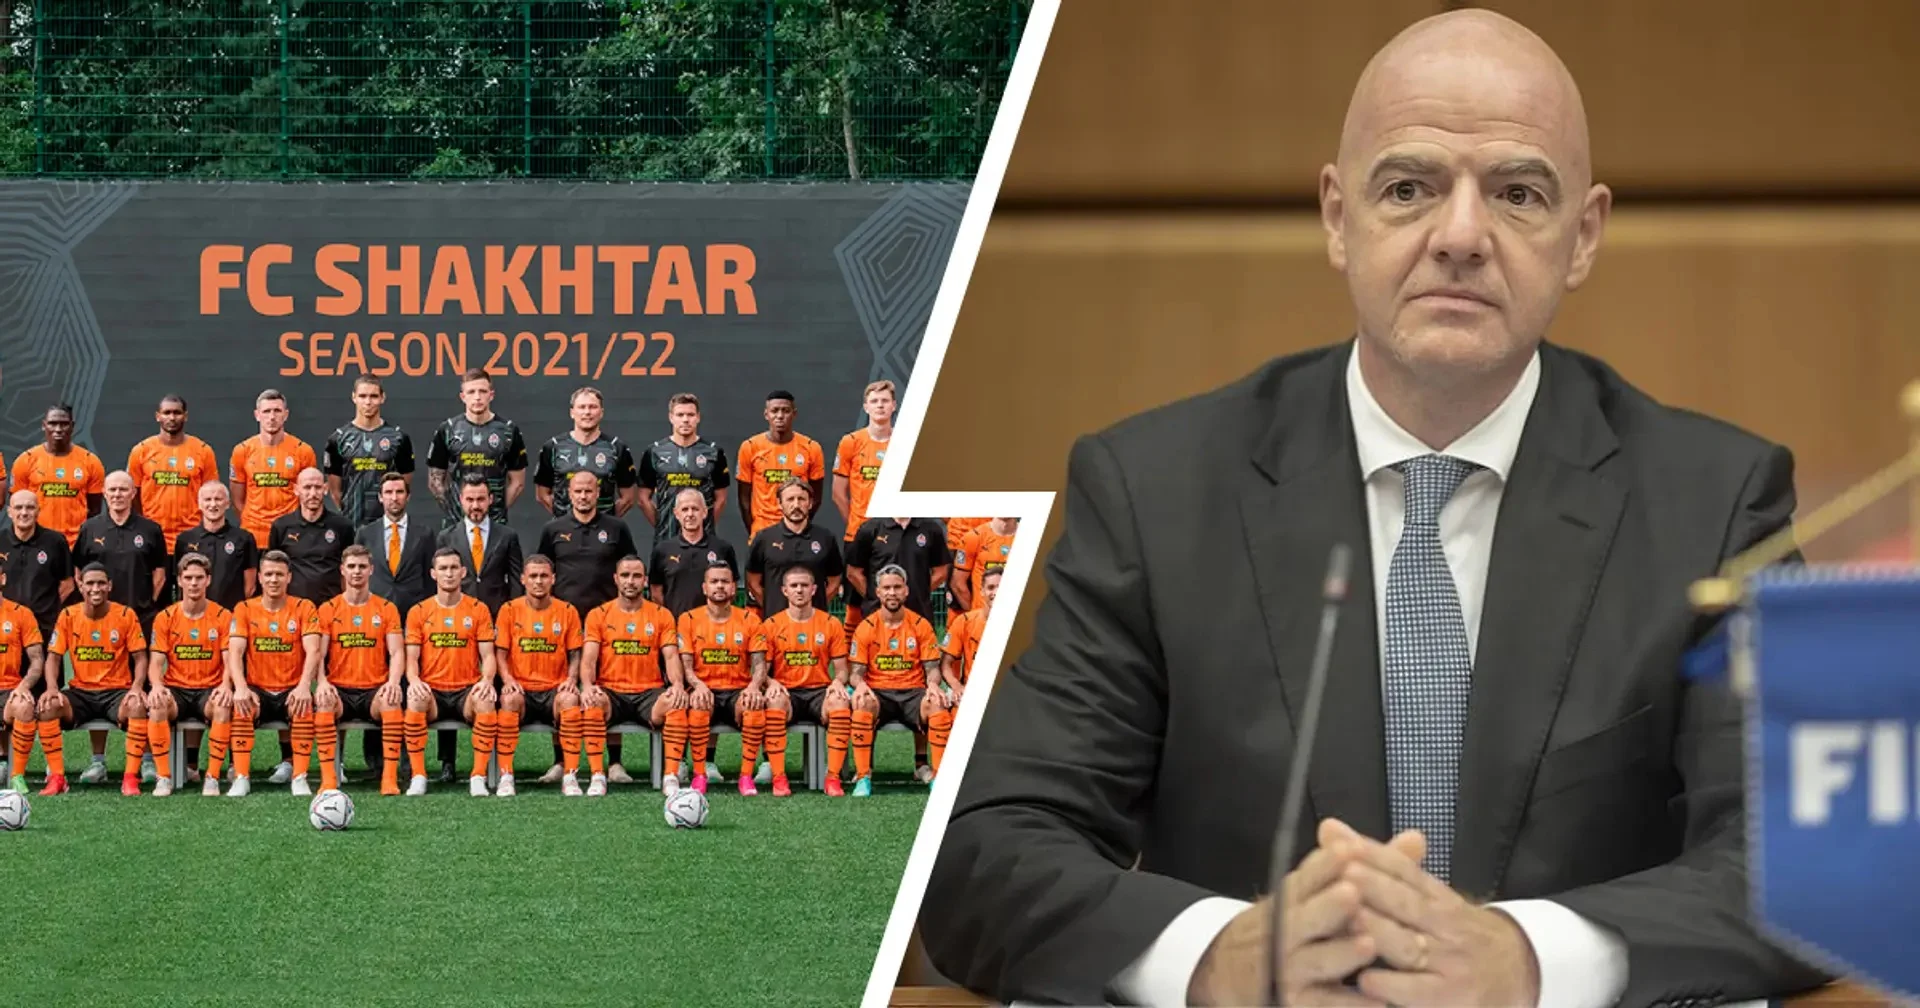 Shakhtar Donetsk seek €50m from FIFA over lost transfer fees in aftermath of Russian aggression